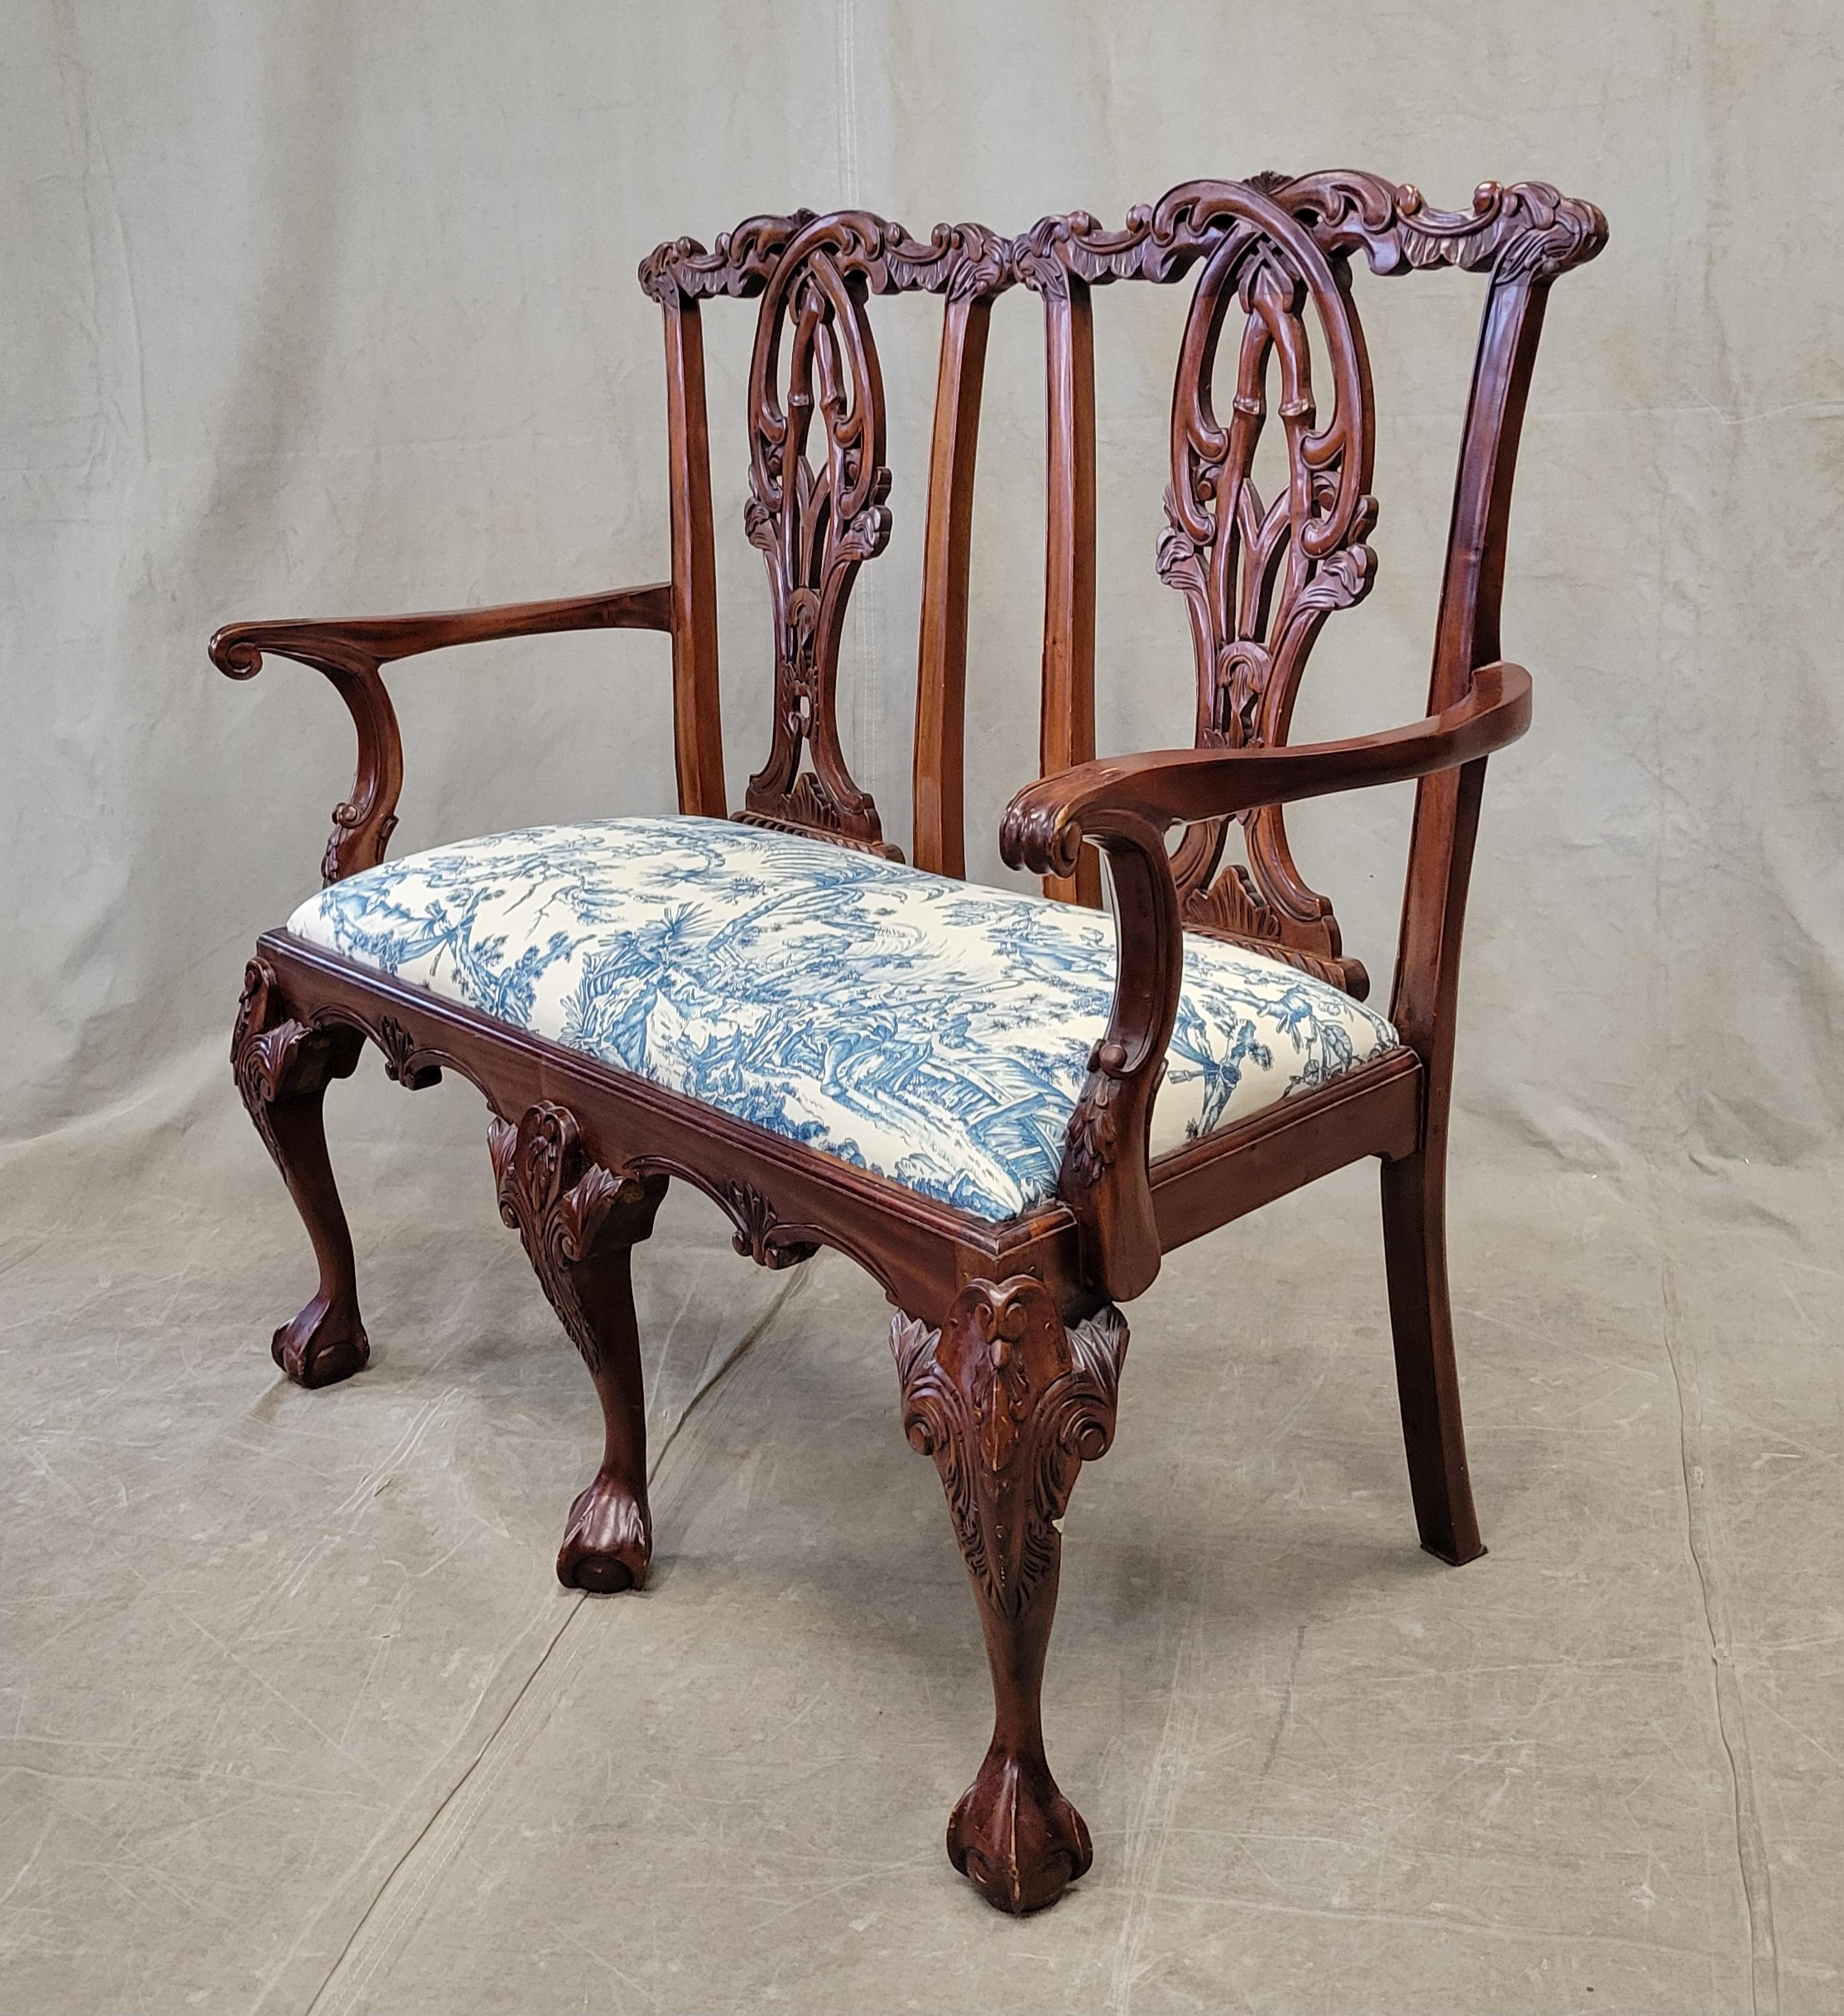 A charming vintage mahogany Chippendale style two-seat bench newly upholstered with Schumacher 